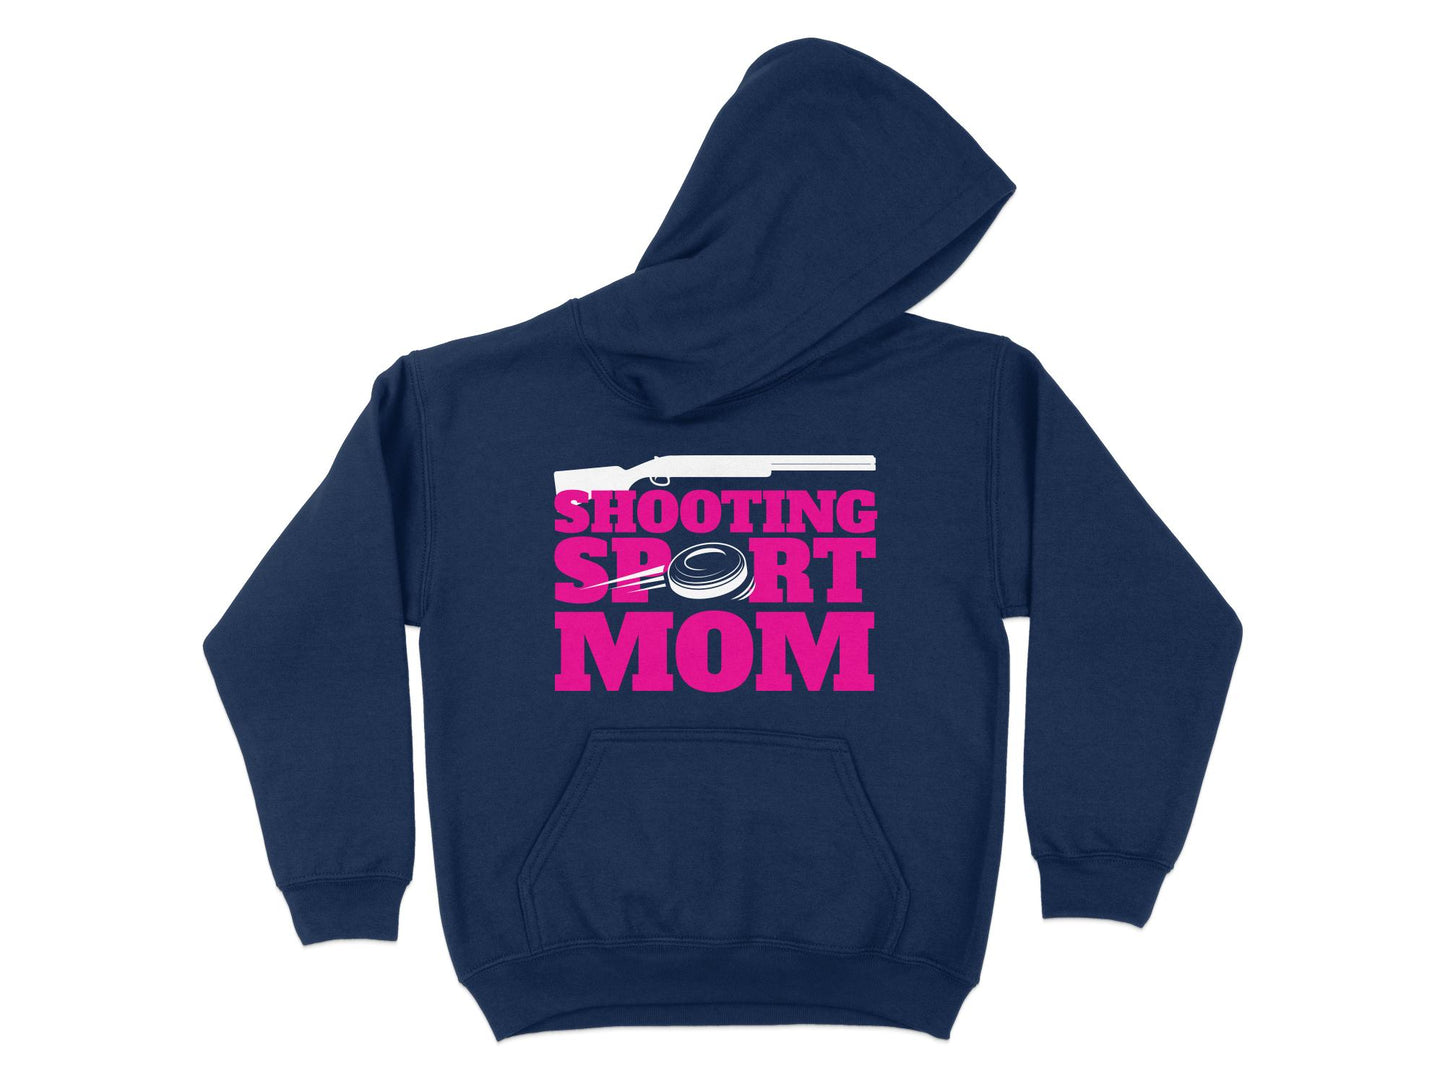 Trap Shooting Hoodie for Moms, navy blue